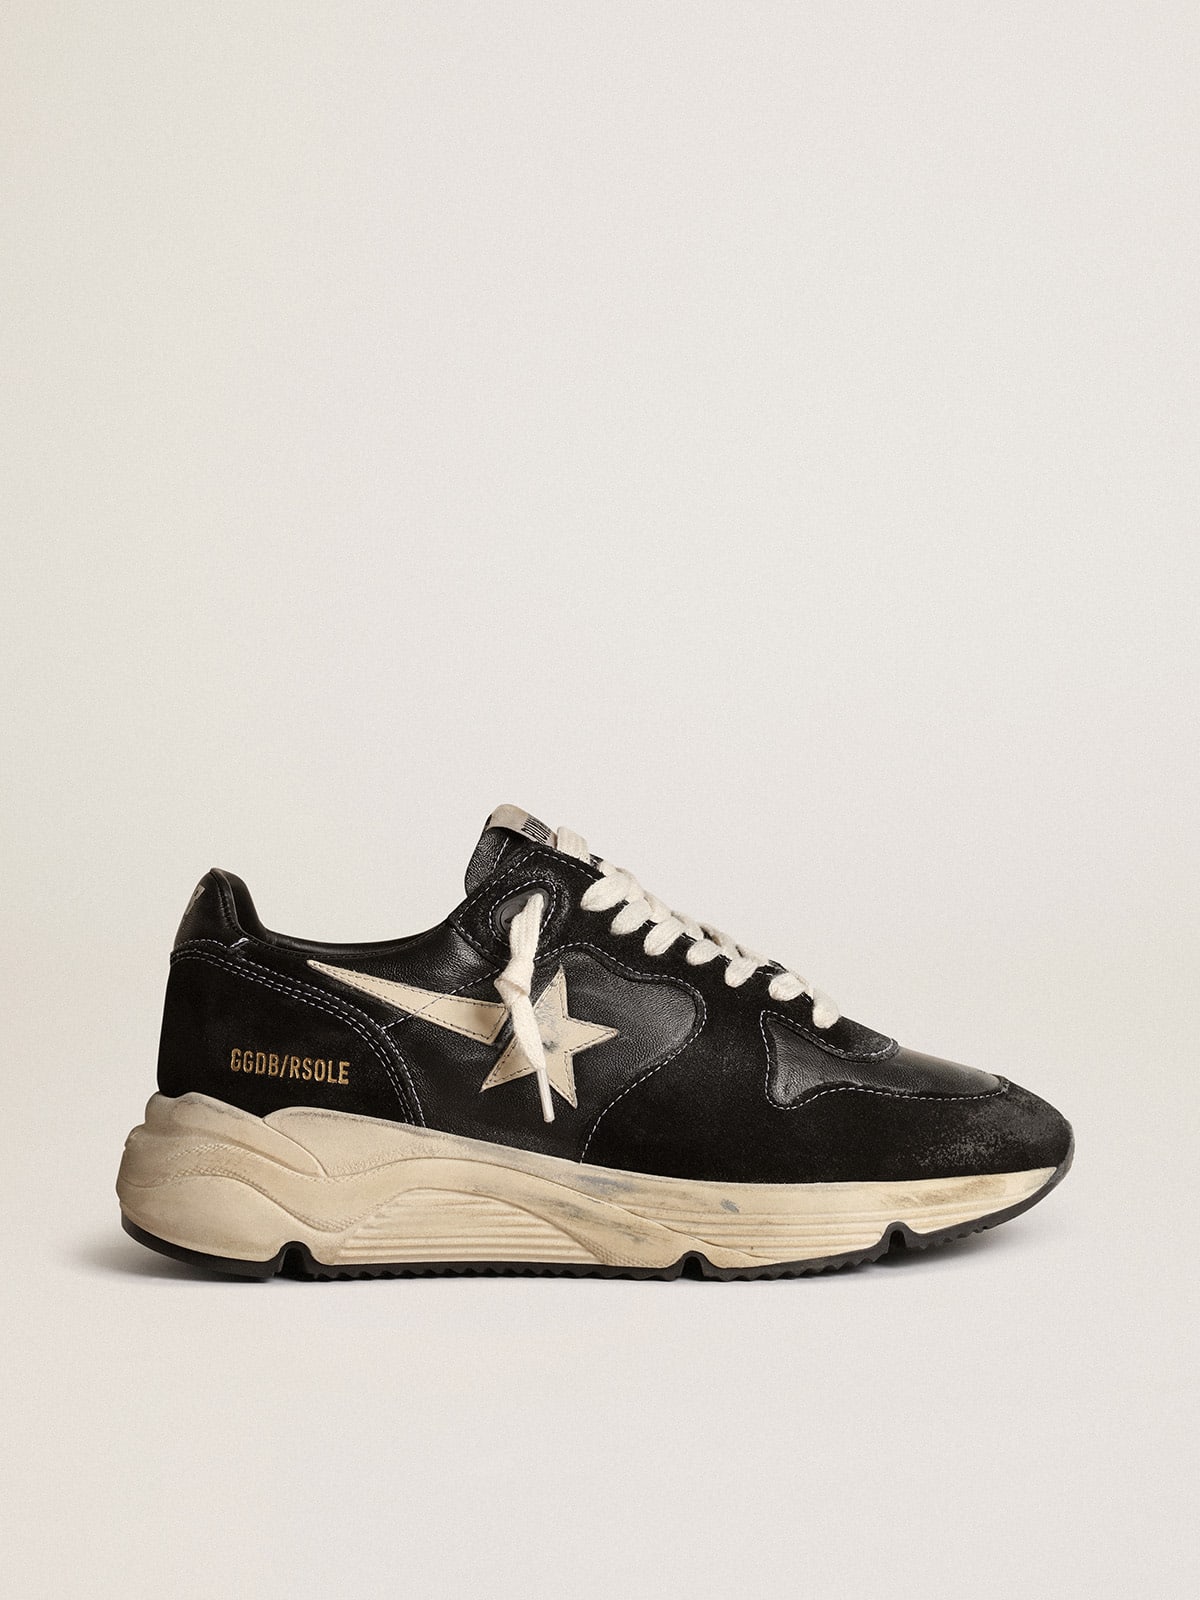 Women's Running Sole in black nappa and suede with white star